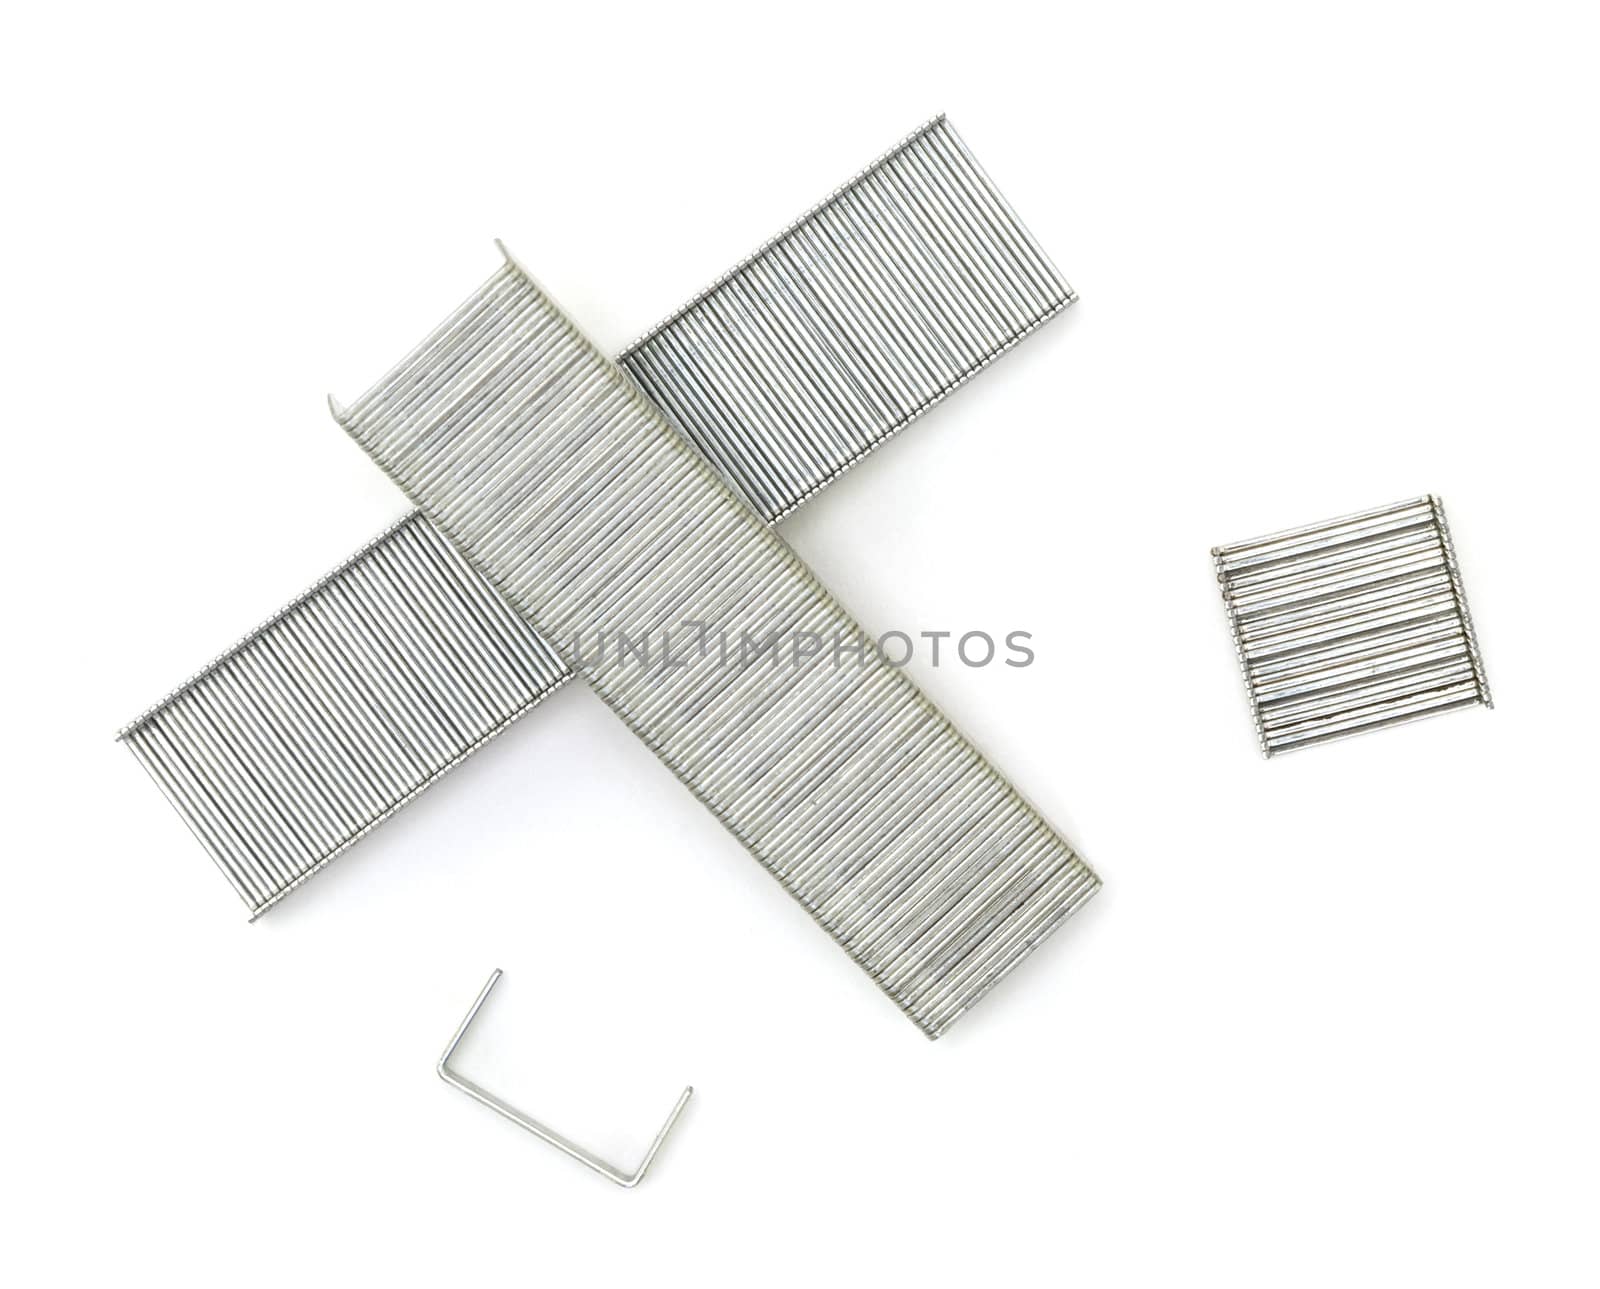 A close up of a collection of staples shot against a white background.